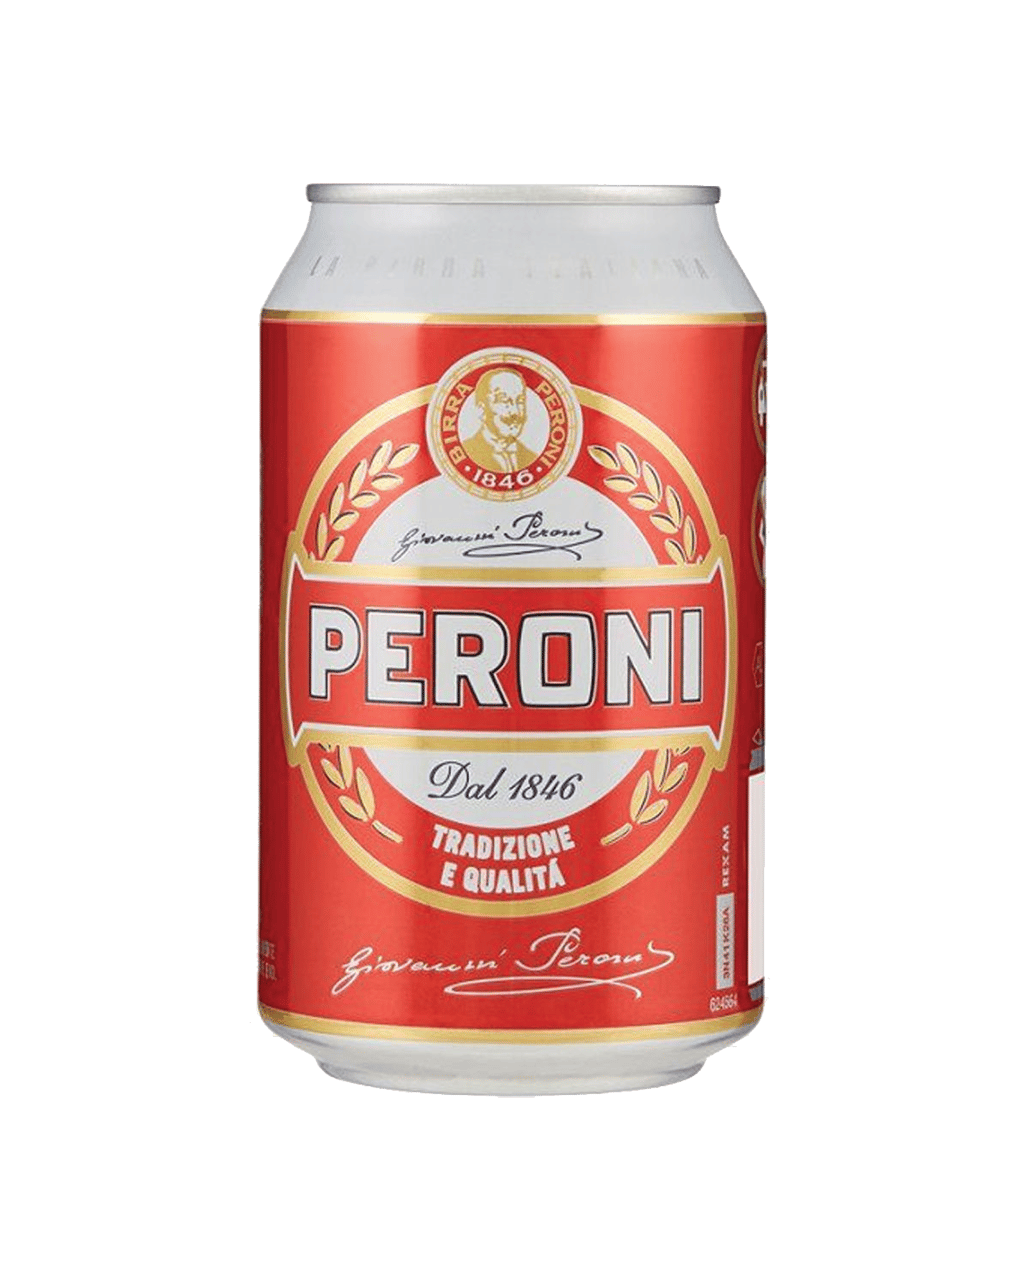 buy-peroni-red-red-italian-lager-cans-330ml-online-or-near-you-in